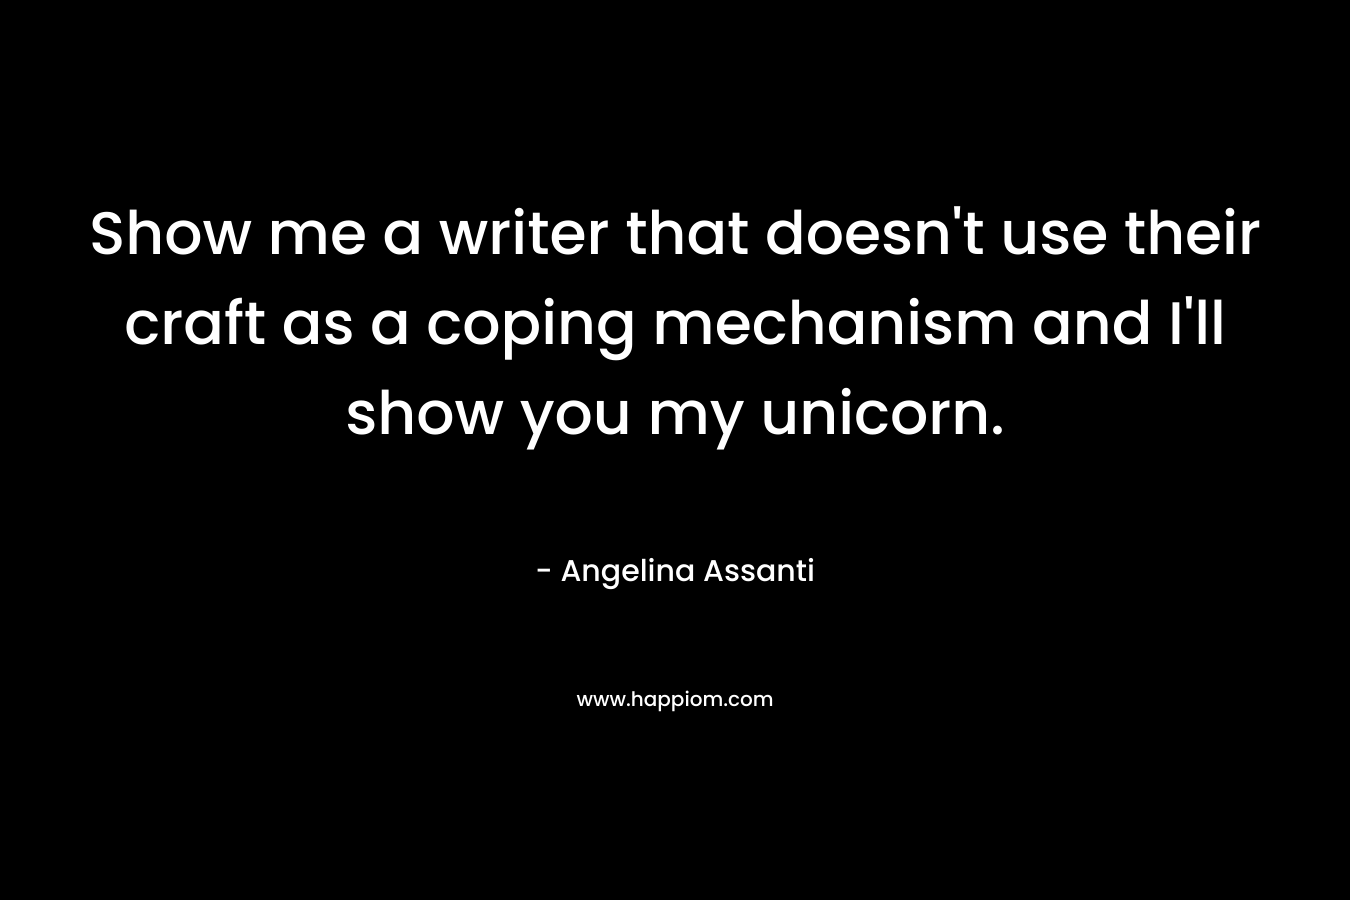 Show me a writer that doesn’t use their craft as a coping mechanism and I’ll show you my unicorn. – Angelina Assanti